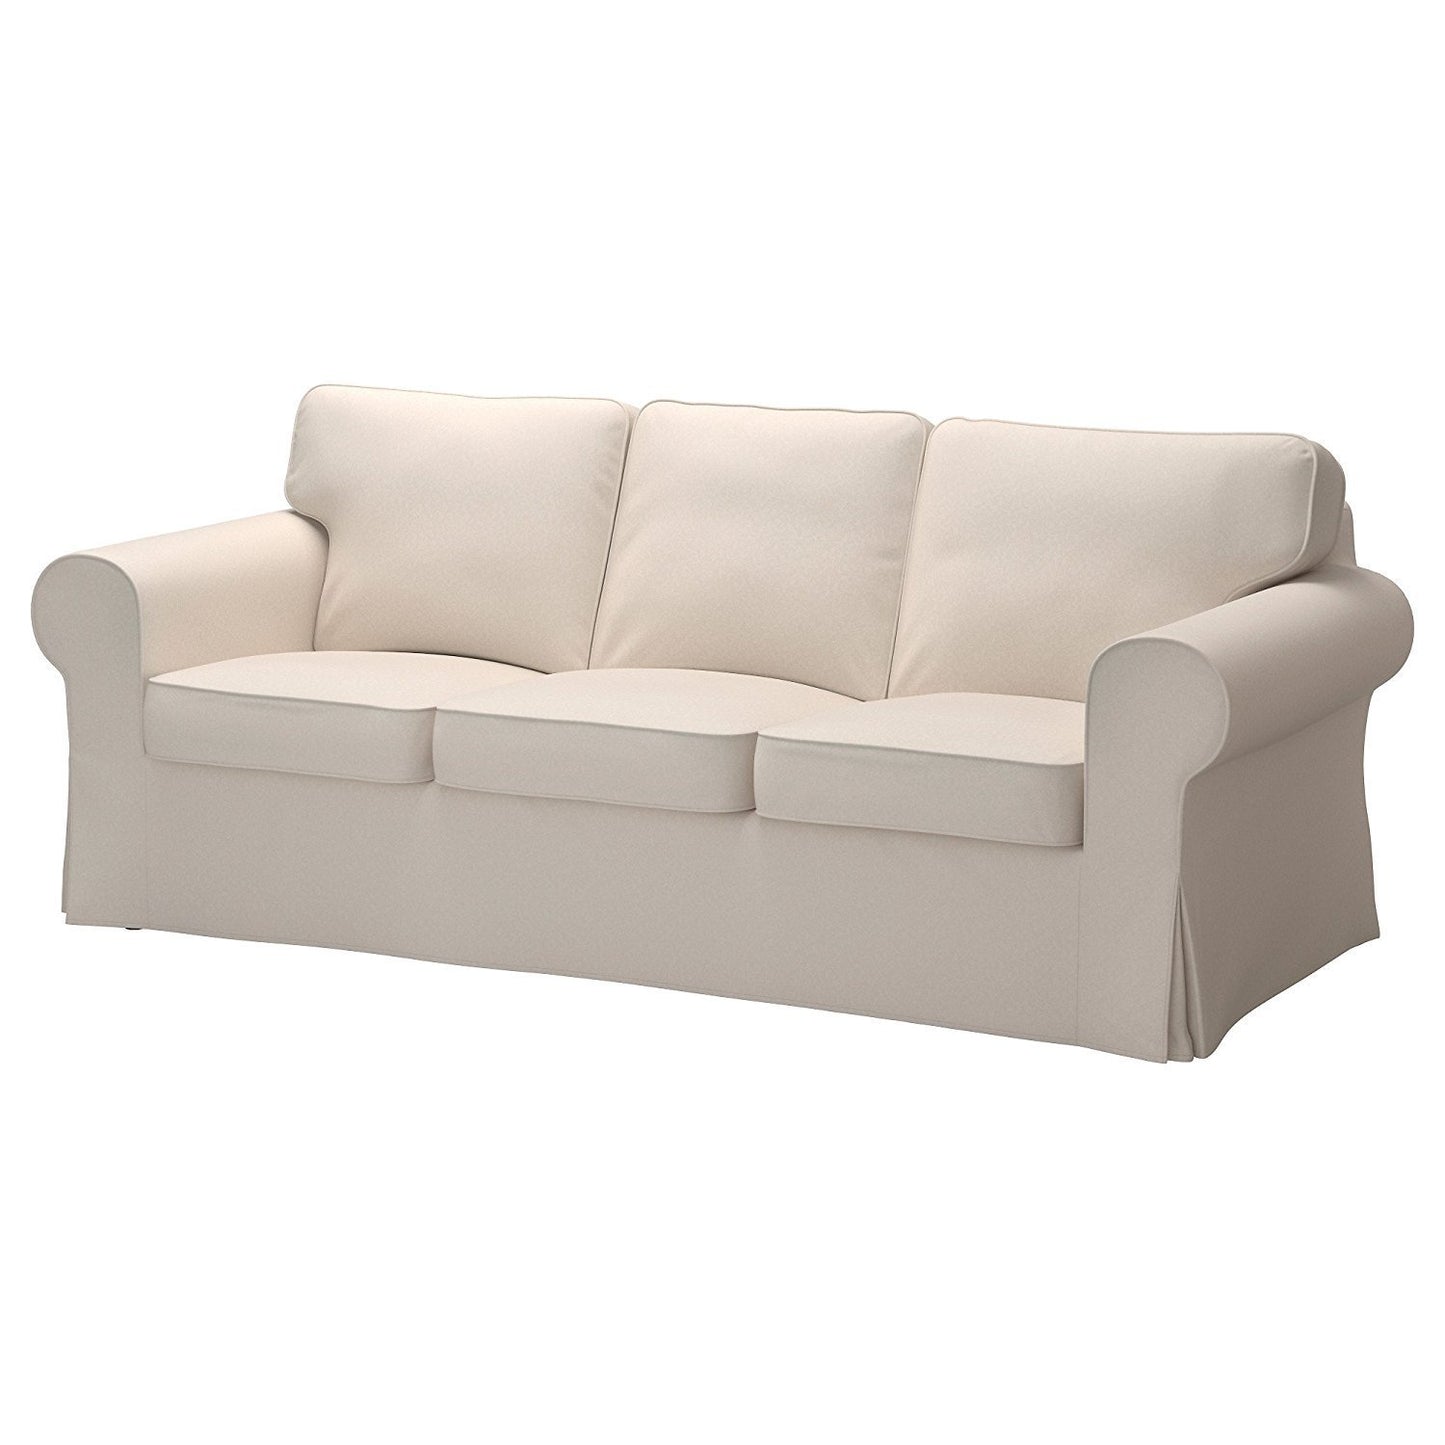 Replacement Cover for IKEA Ektorp 3-seat Sofa without Chaise , Lofallet Beige does NOT fit Ektorp 3.5-seat Sofa